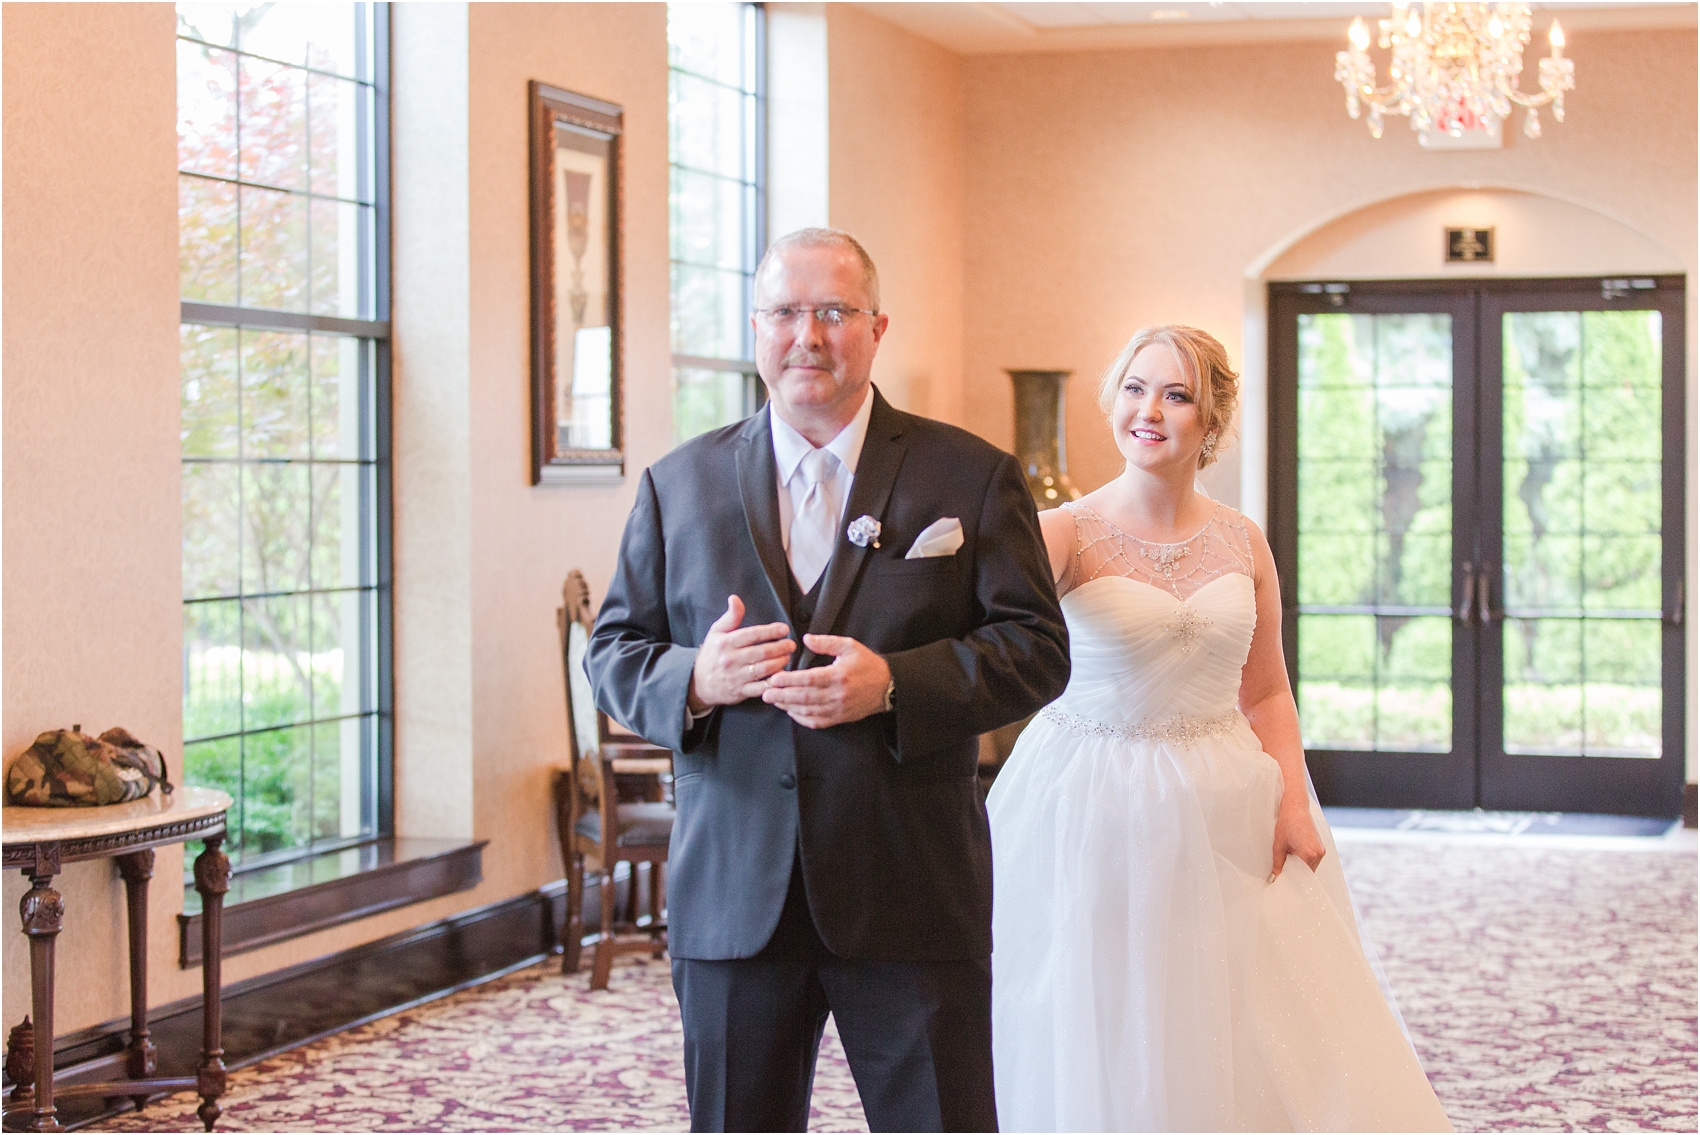 father-and-bride-share-emotional-first-look-on-wedding-day-photos-in-detroit-michigan-by-courtney-carolyn-photography_0002.jpg